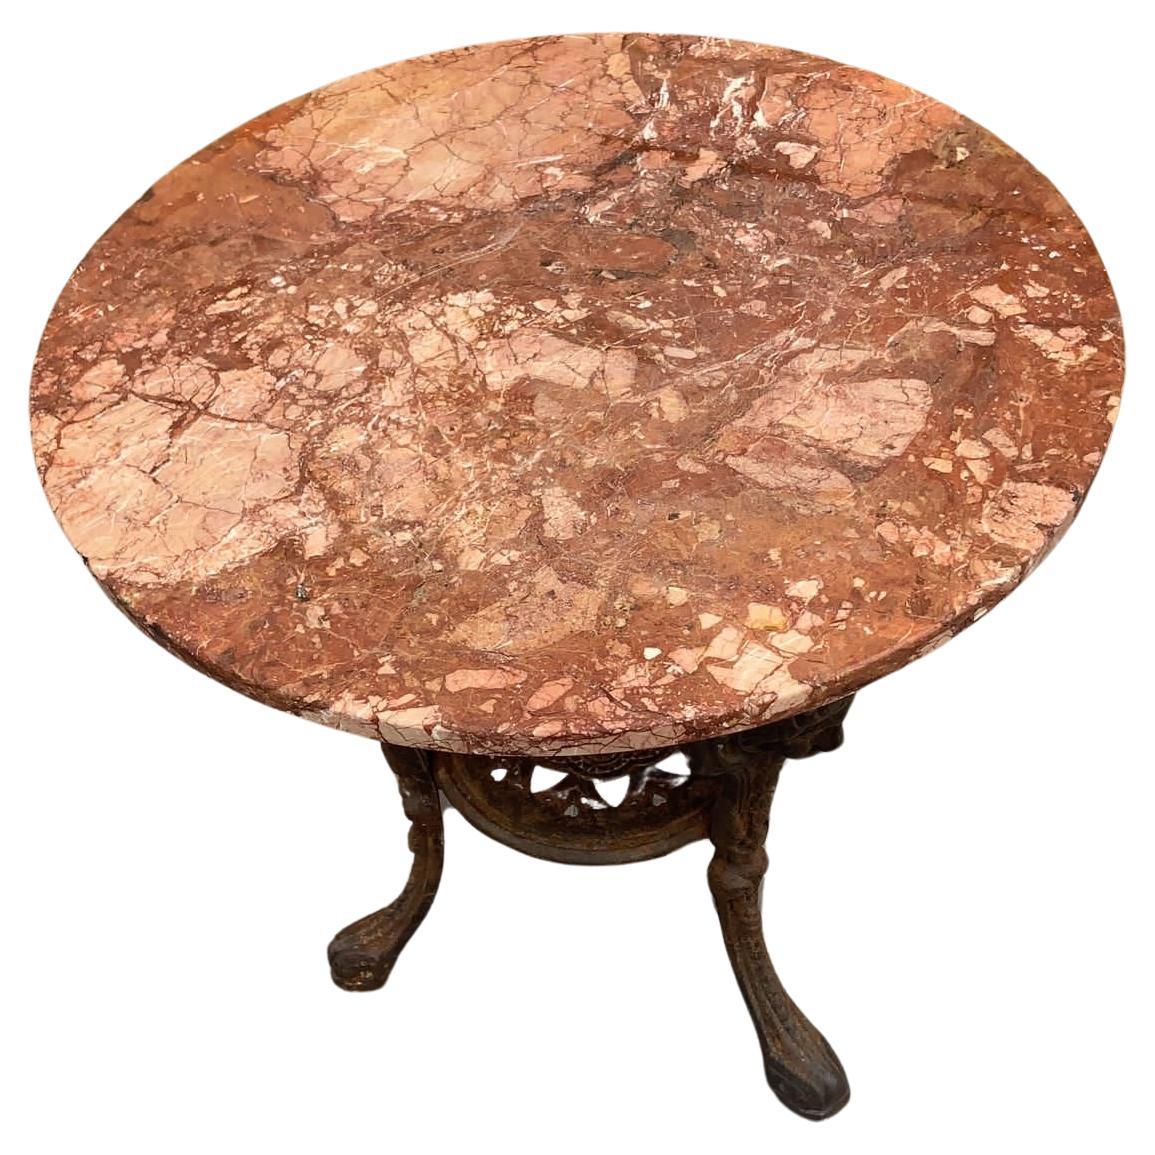 Antique Neoclassical Cast Iron Marble Top English Pub Table

Fantastic Early 1900's Neoclassical Ornate Figural Cast Iron Base with Round Italian Marble Top Pub Table. This English table is a solid, sturdy classic antique side table. It is suitable